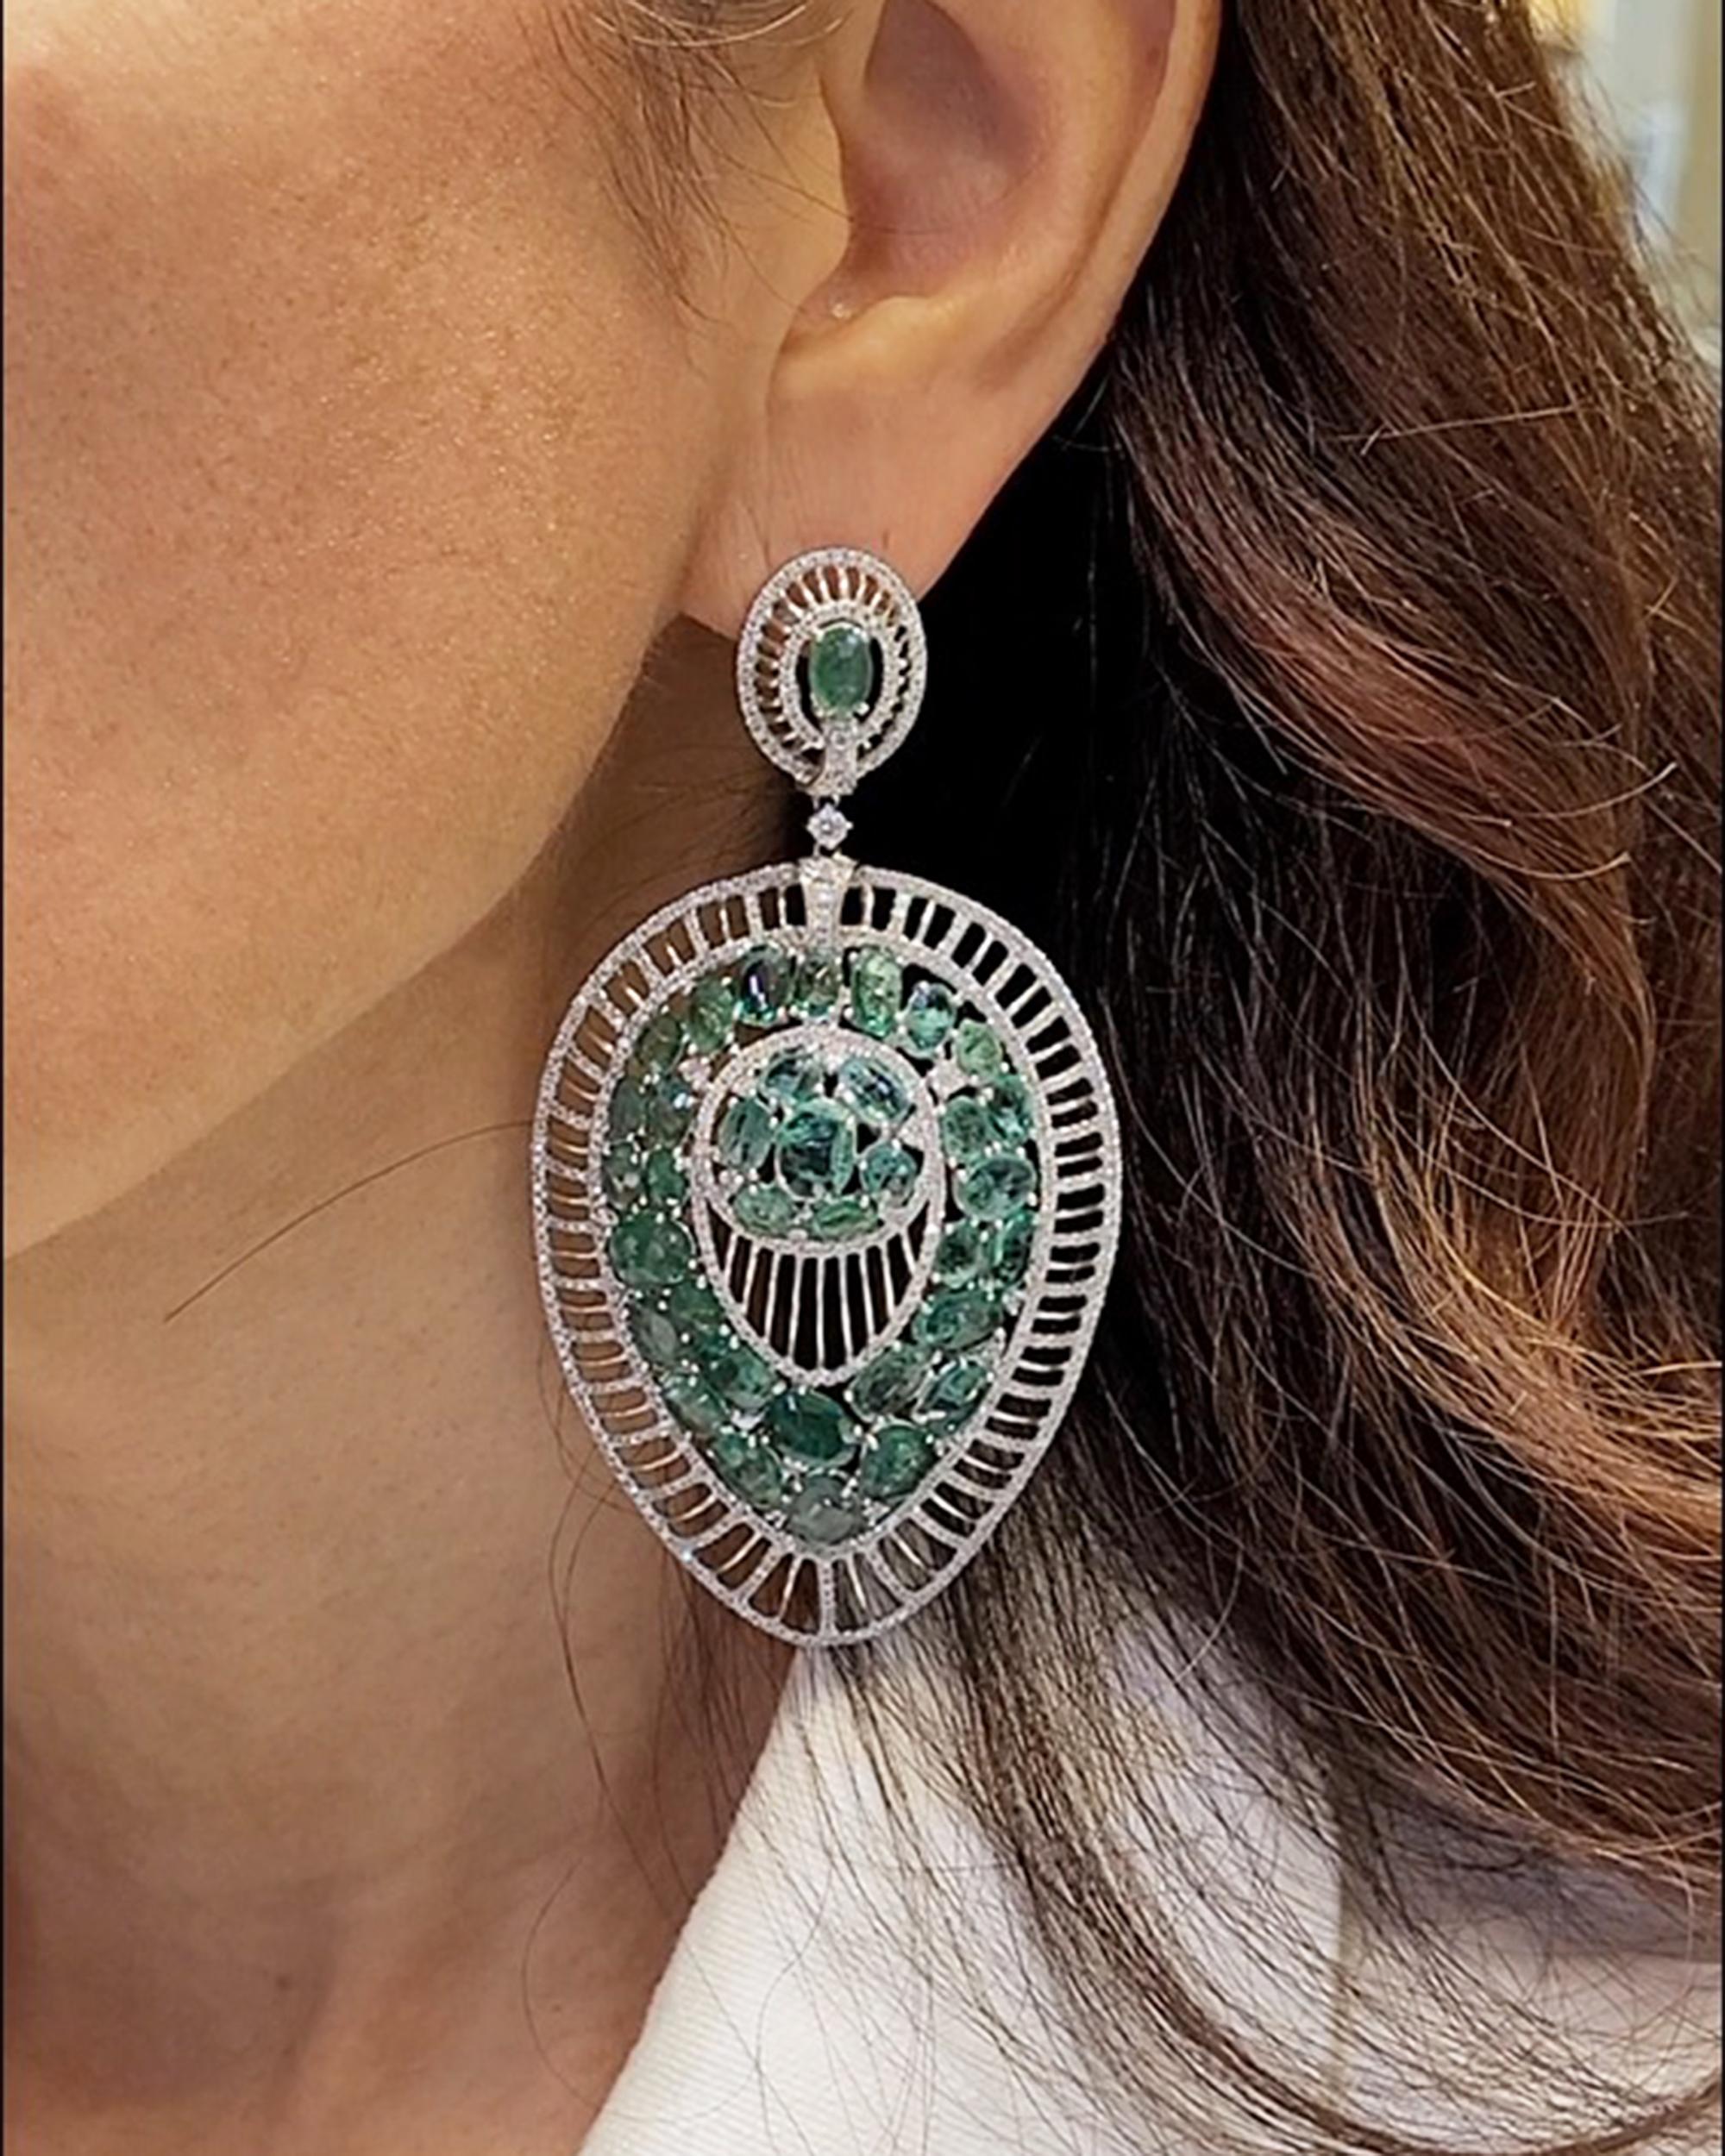 A pair of beautiful chandelier earrings comprising of emeralds and round diamonds.
Total carat weight of the emeralds is approximately 29.40.
Total carat weight of the diamonds is approximately 5.65..
Metal is 18k white gold. Gross weight 46.36